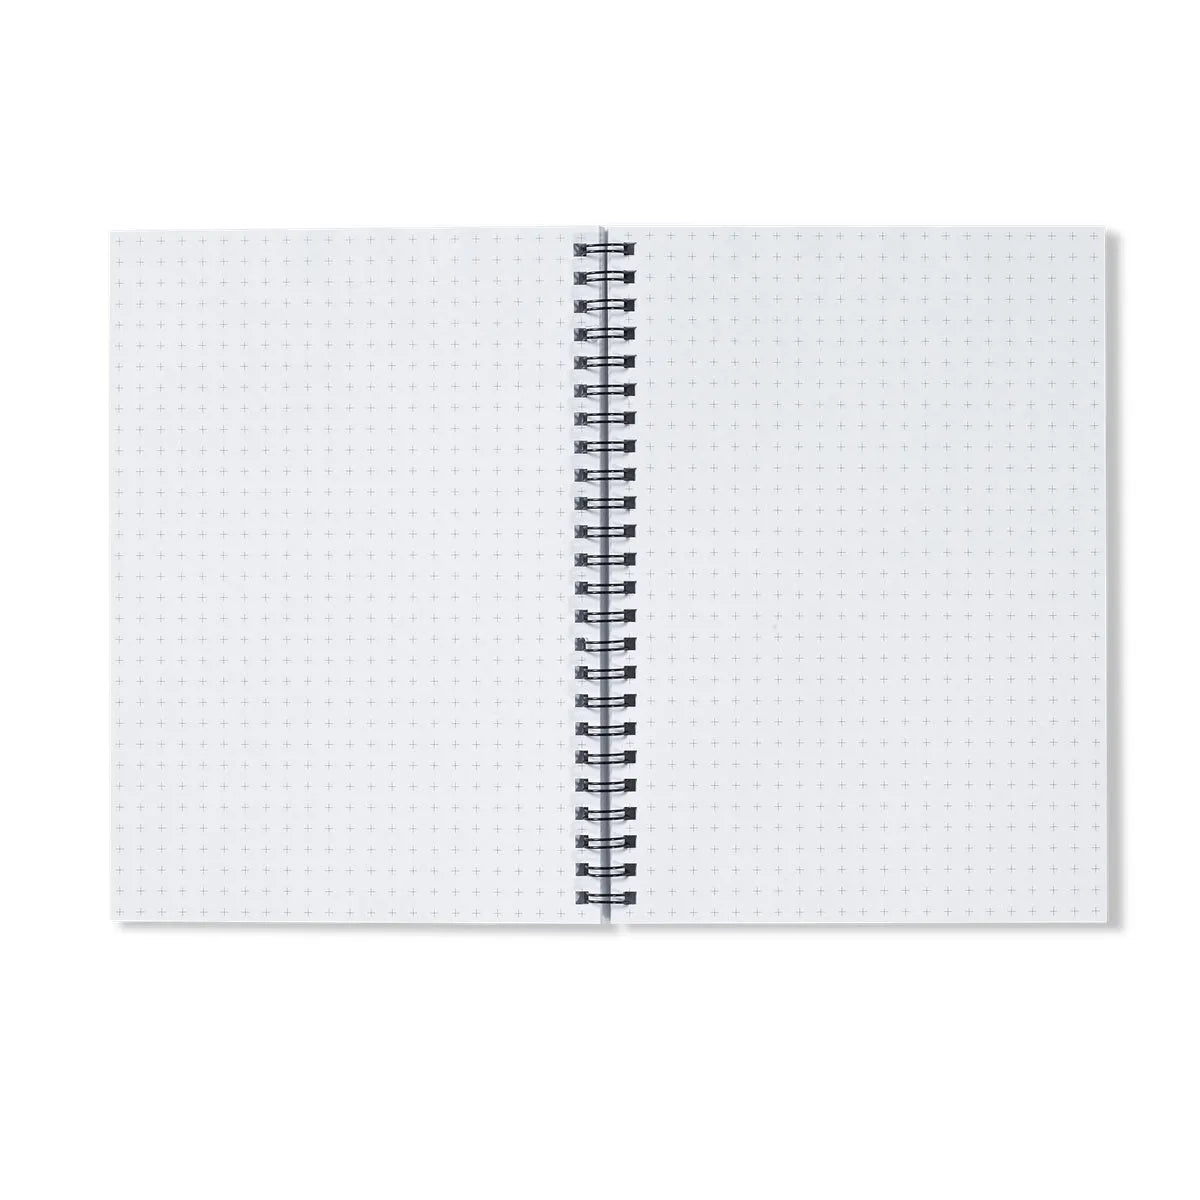 Aviary Red Notebook - Notebooks & Notepads - Aesthetic Art